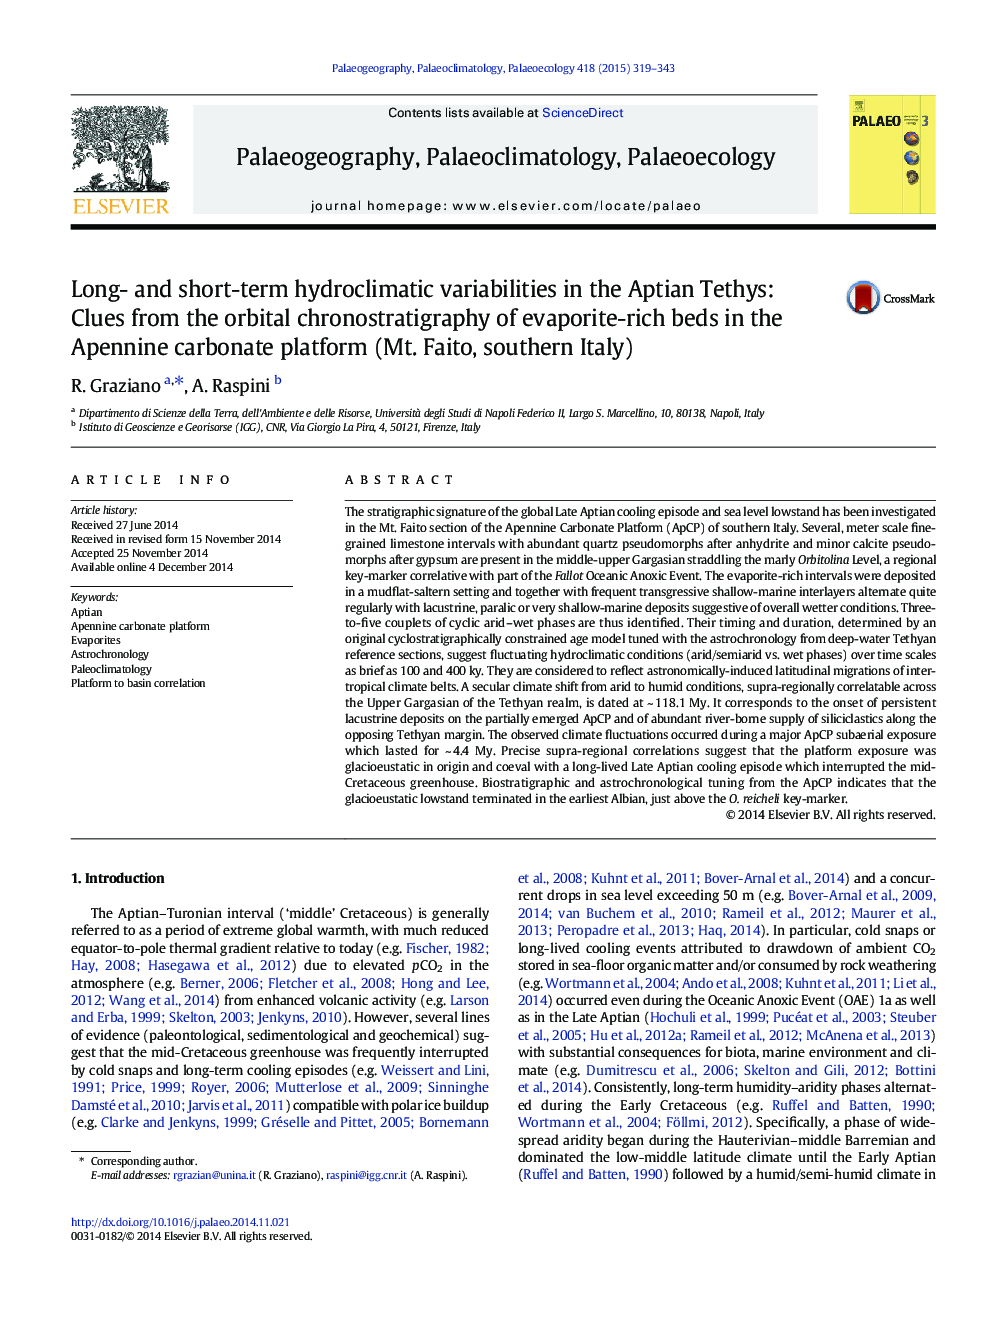 Long- and short-term hydroclimatic variabilities in the Aptian Tethys: Clues from the orbital chronostratigraphy of evaporite-rich beds in the Apennine carbonate platform (Mt. Faito, southern Italy)